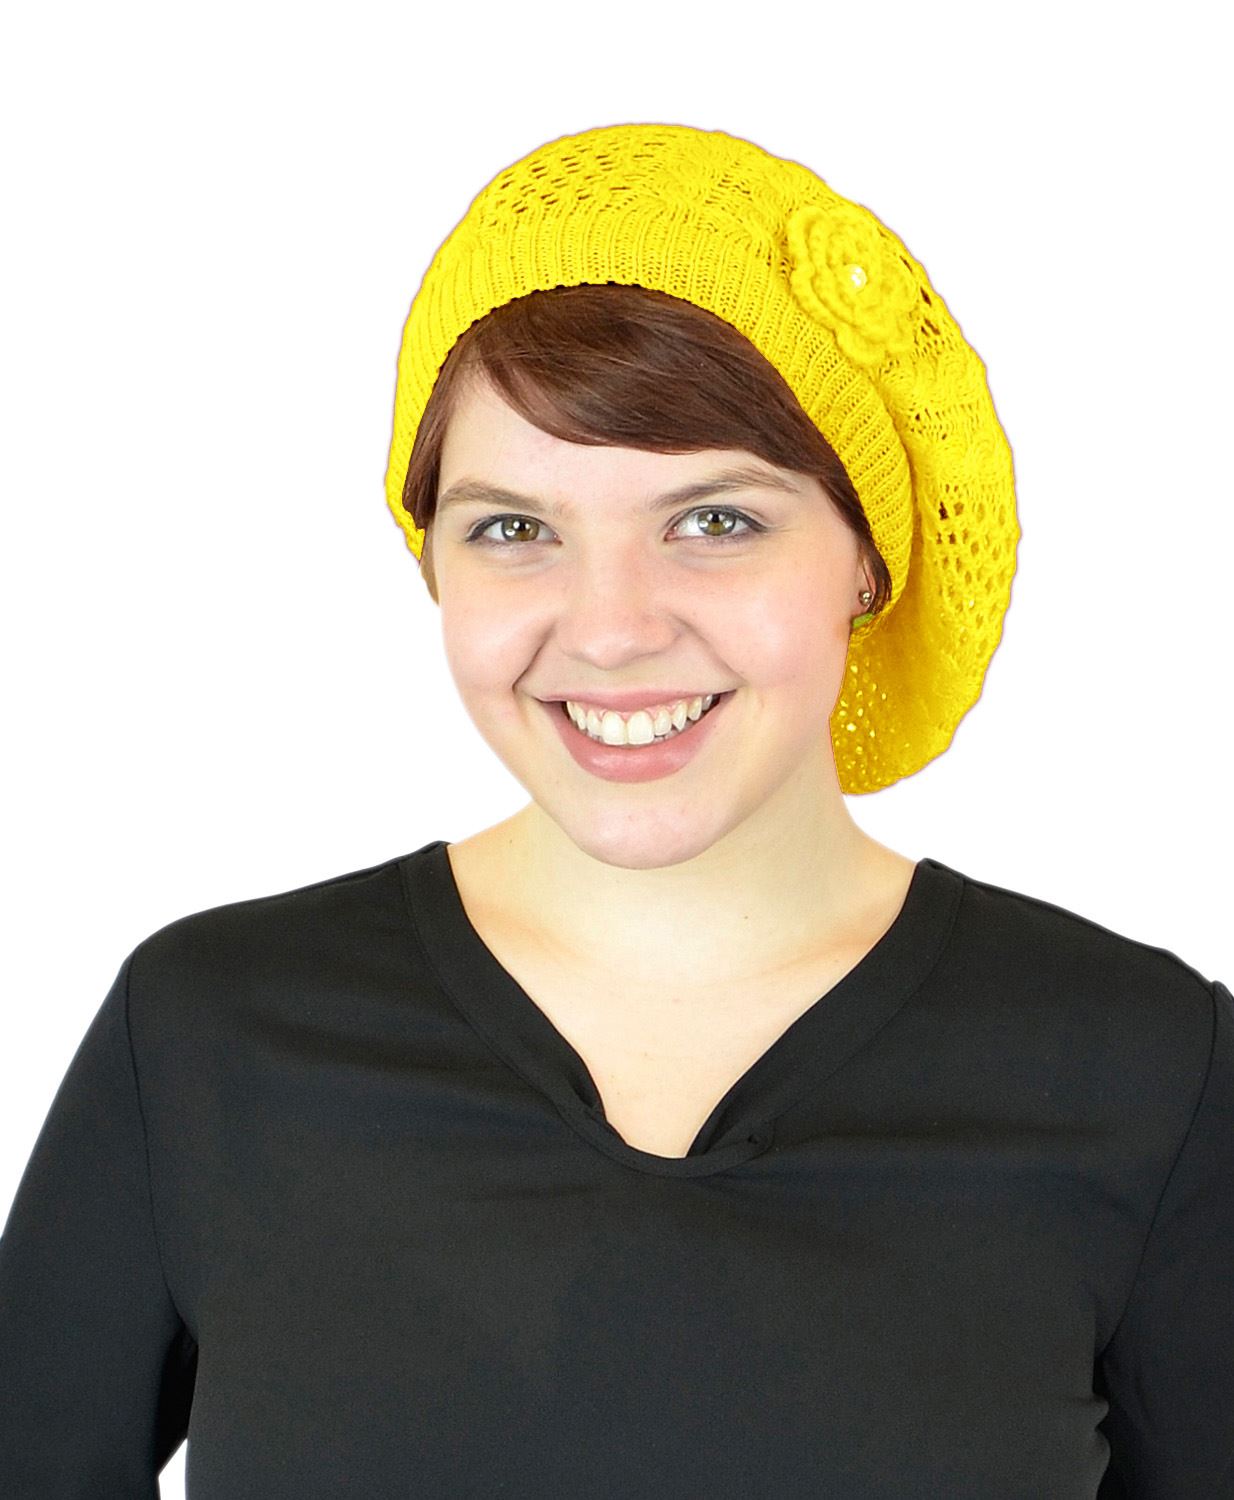 Belle Donne-Women's Mesh Crocheted Flower Accented Slouchy Beret Hat- Yellow